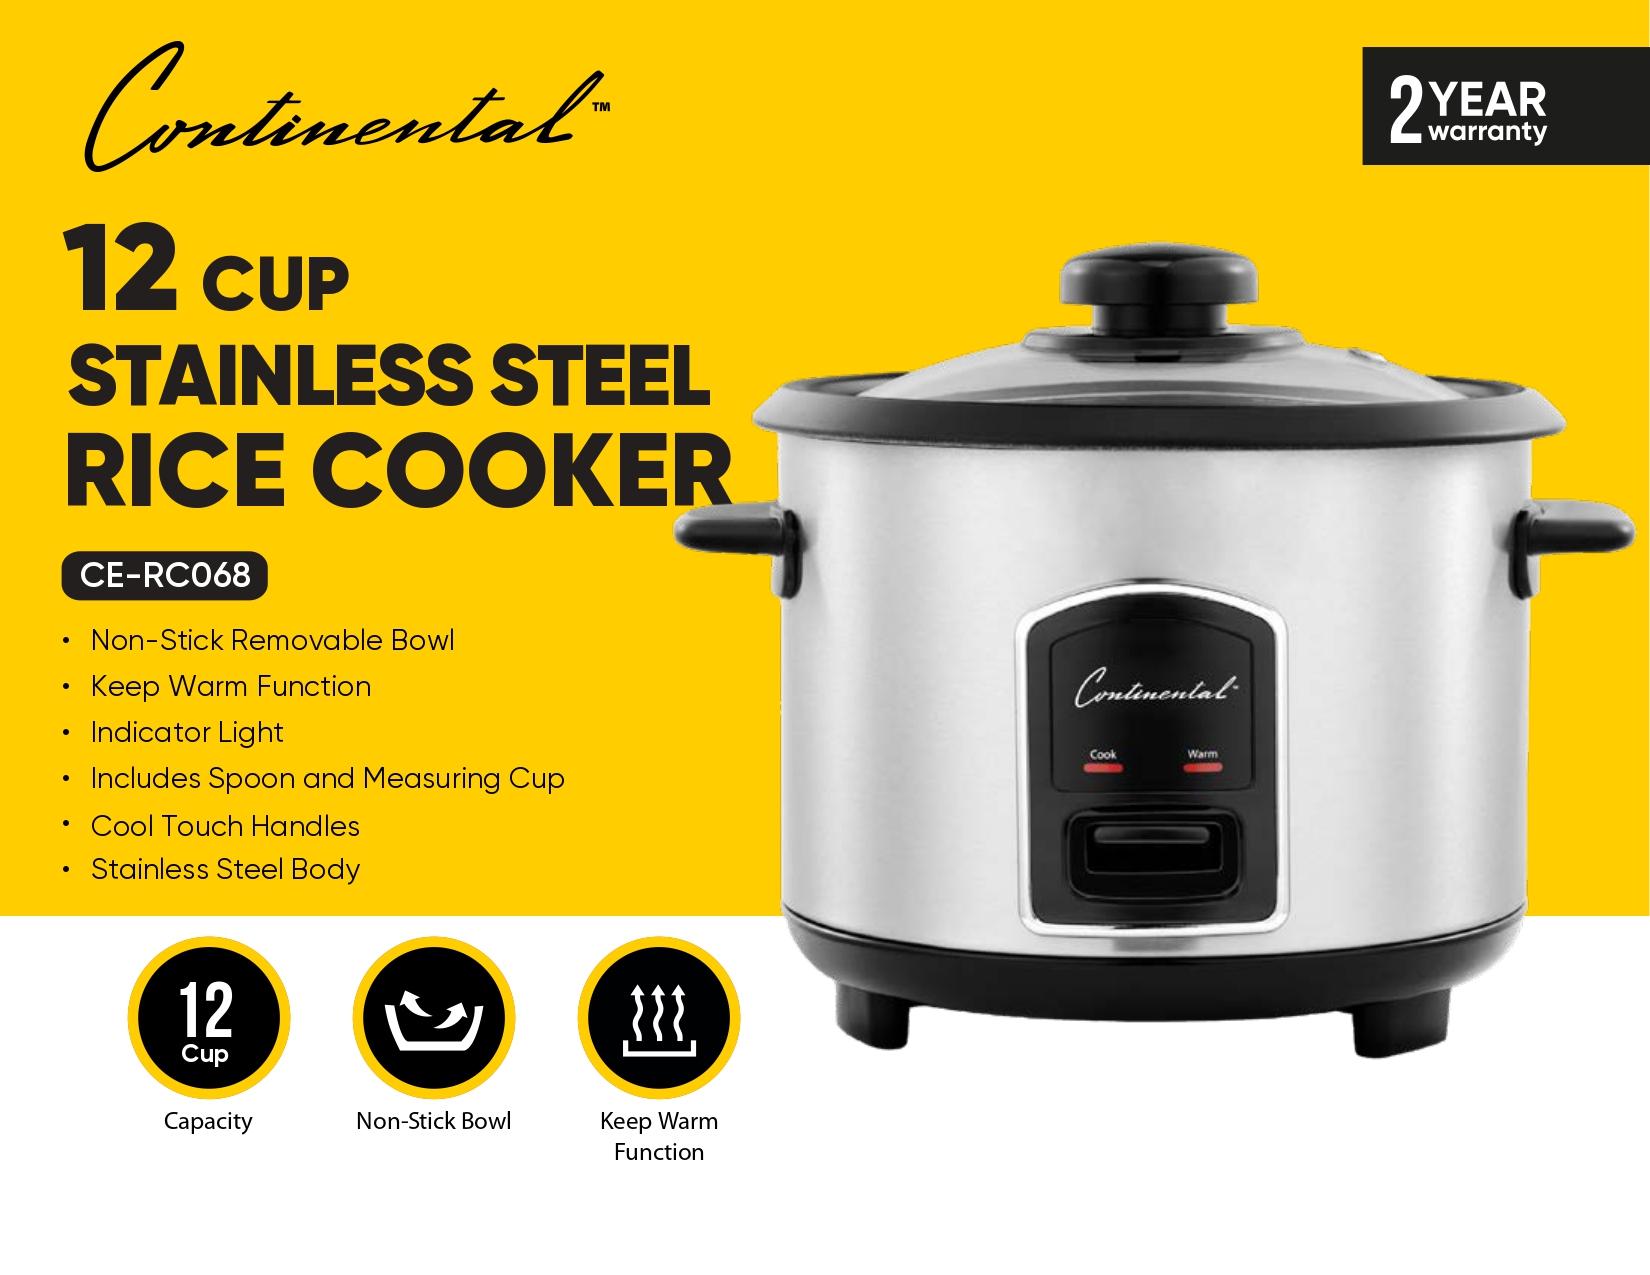 12 CUP STAINLESS STEEL RICE COOKER